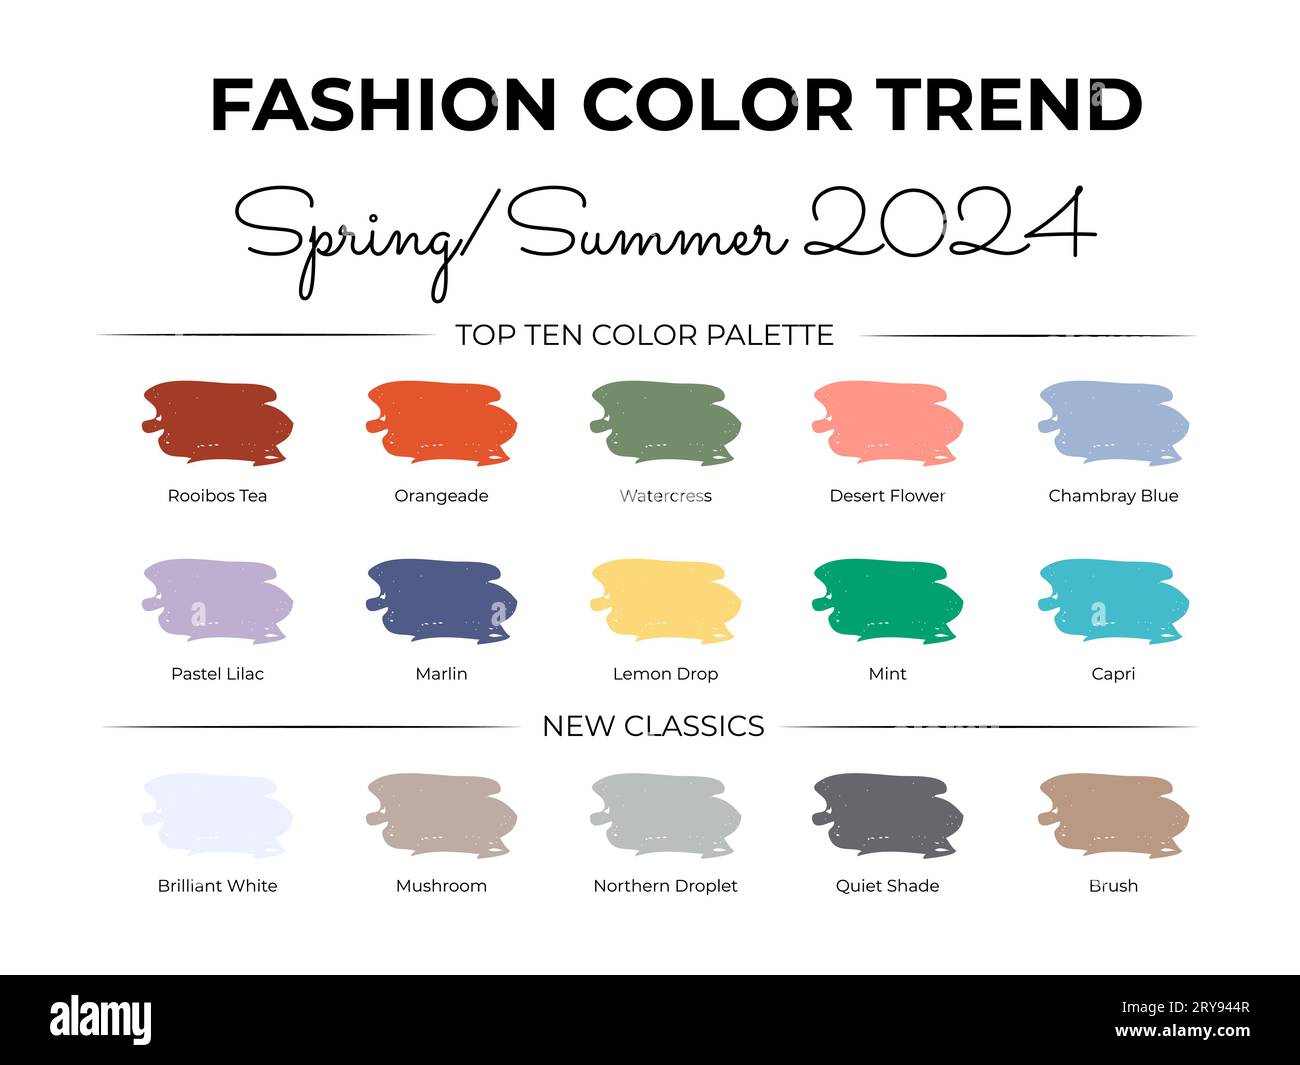 Fashion Color Trend Spring - Summer 2024. Trendy colors palette guide ...